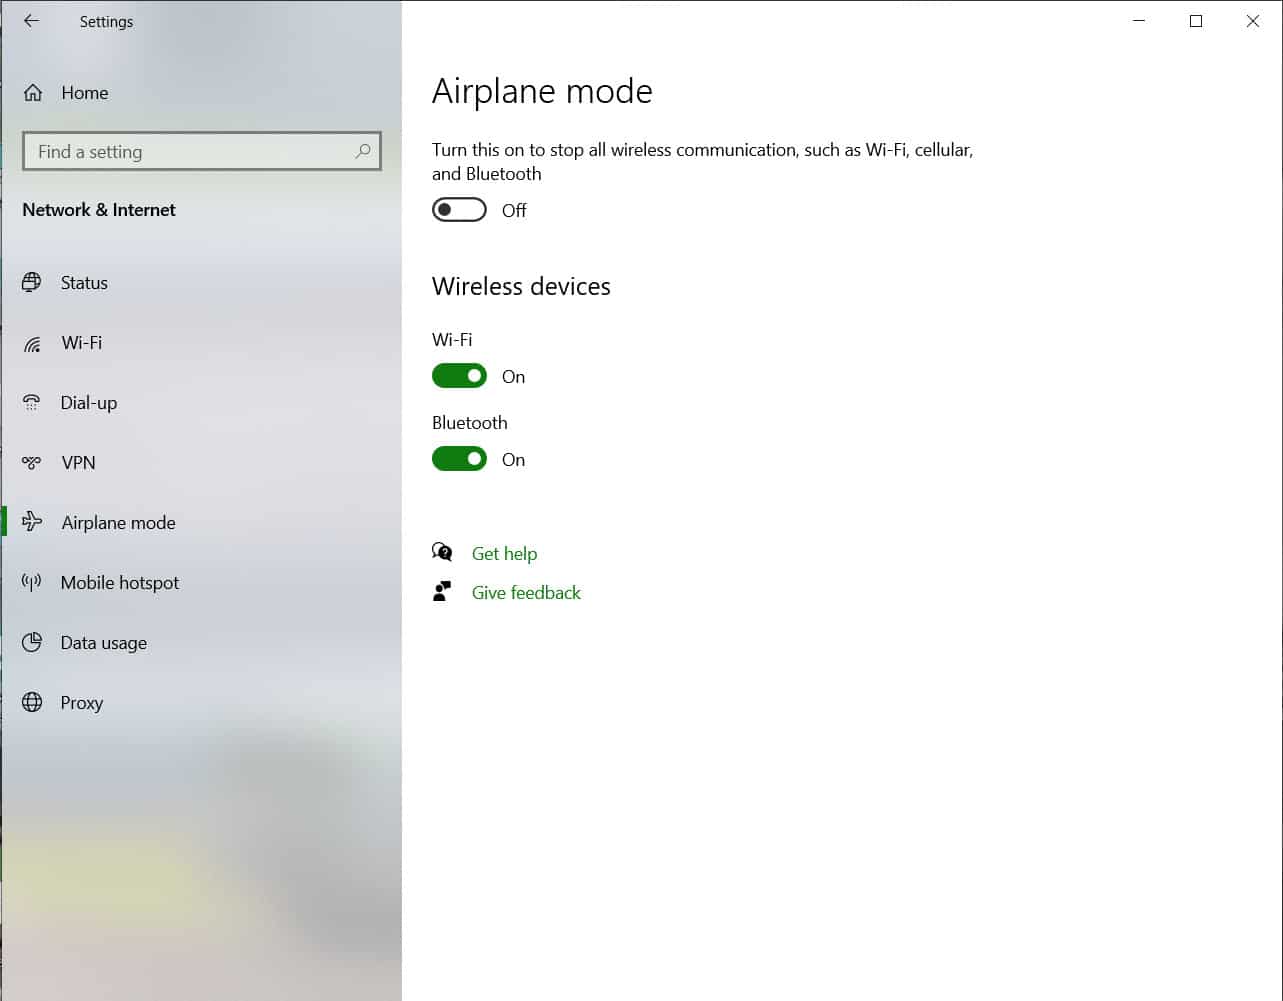 How to Turn Off Airplane Mode in Windows 10